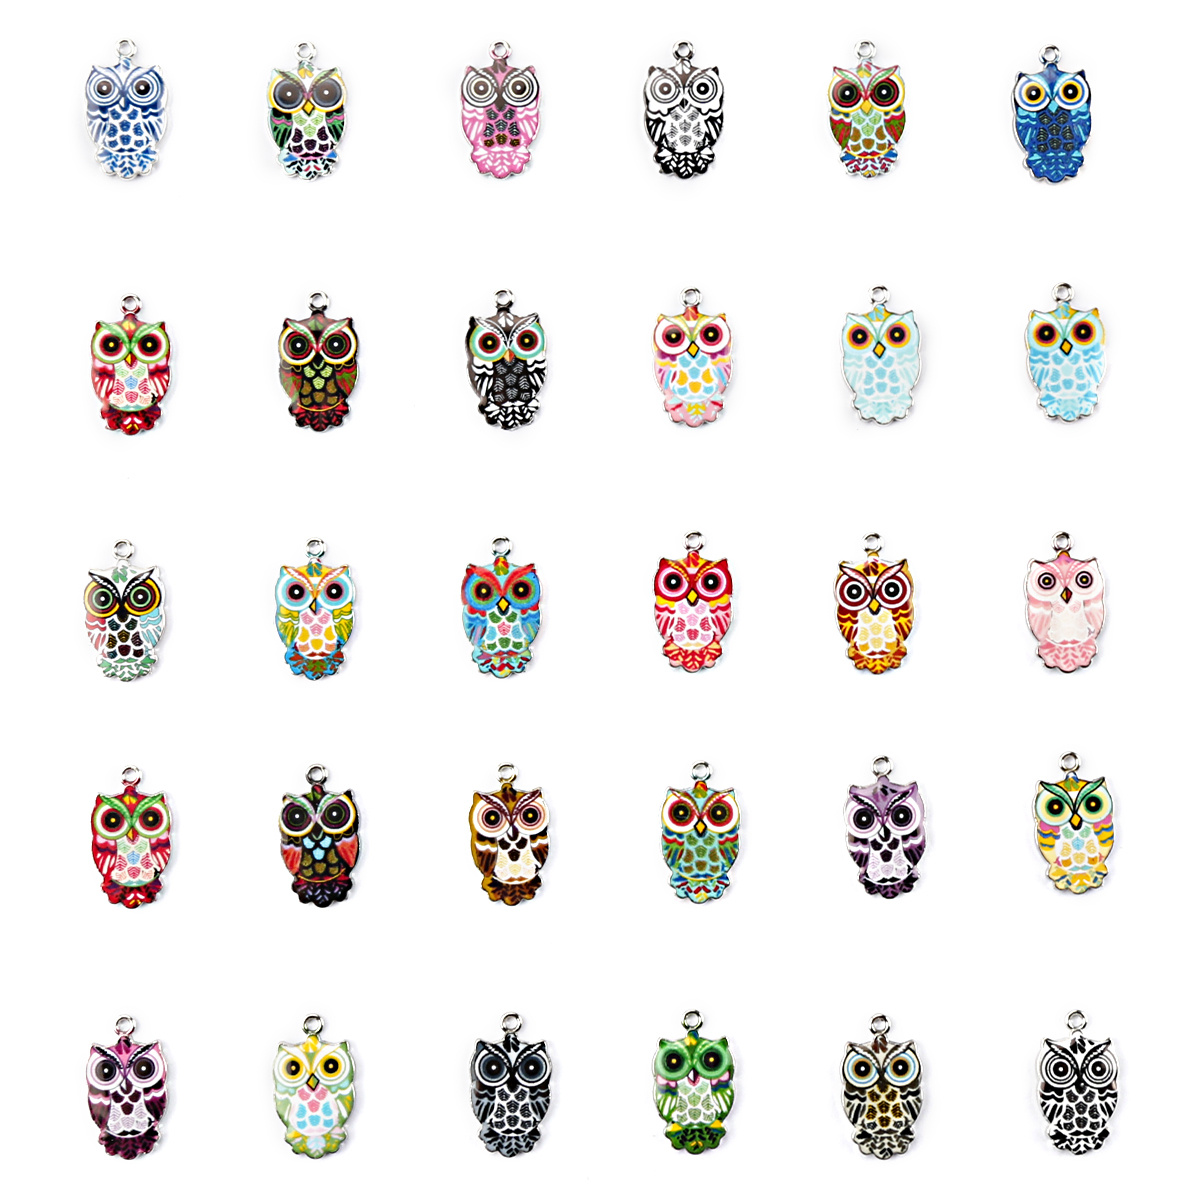 

30pcs Owl Enamel Charms, Colorful Metal Owl Charms Pendants Jewelry Making Supplies For Diy Necklace Bracelet Earring Making Jewelry Pendants Craft